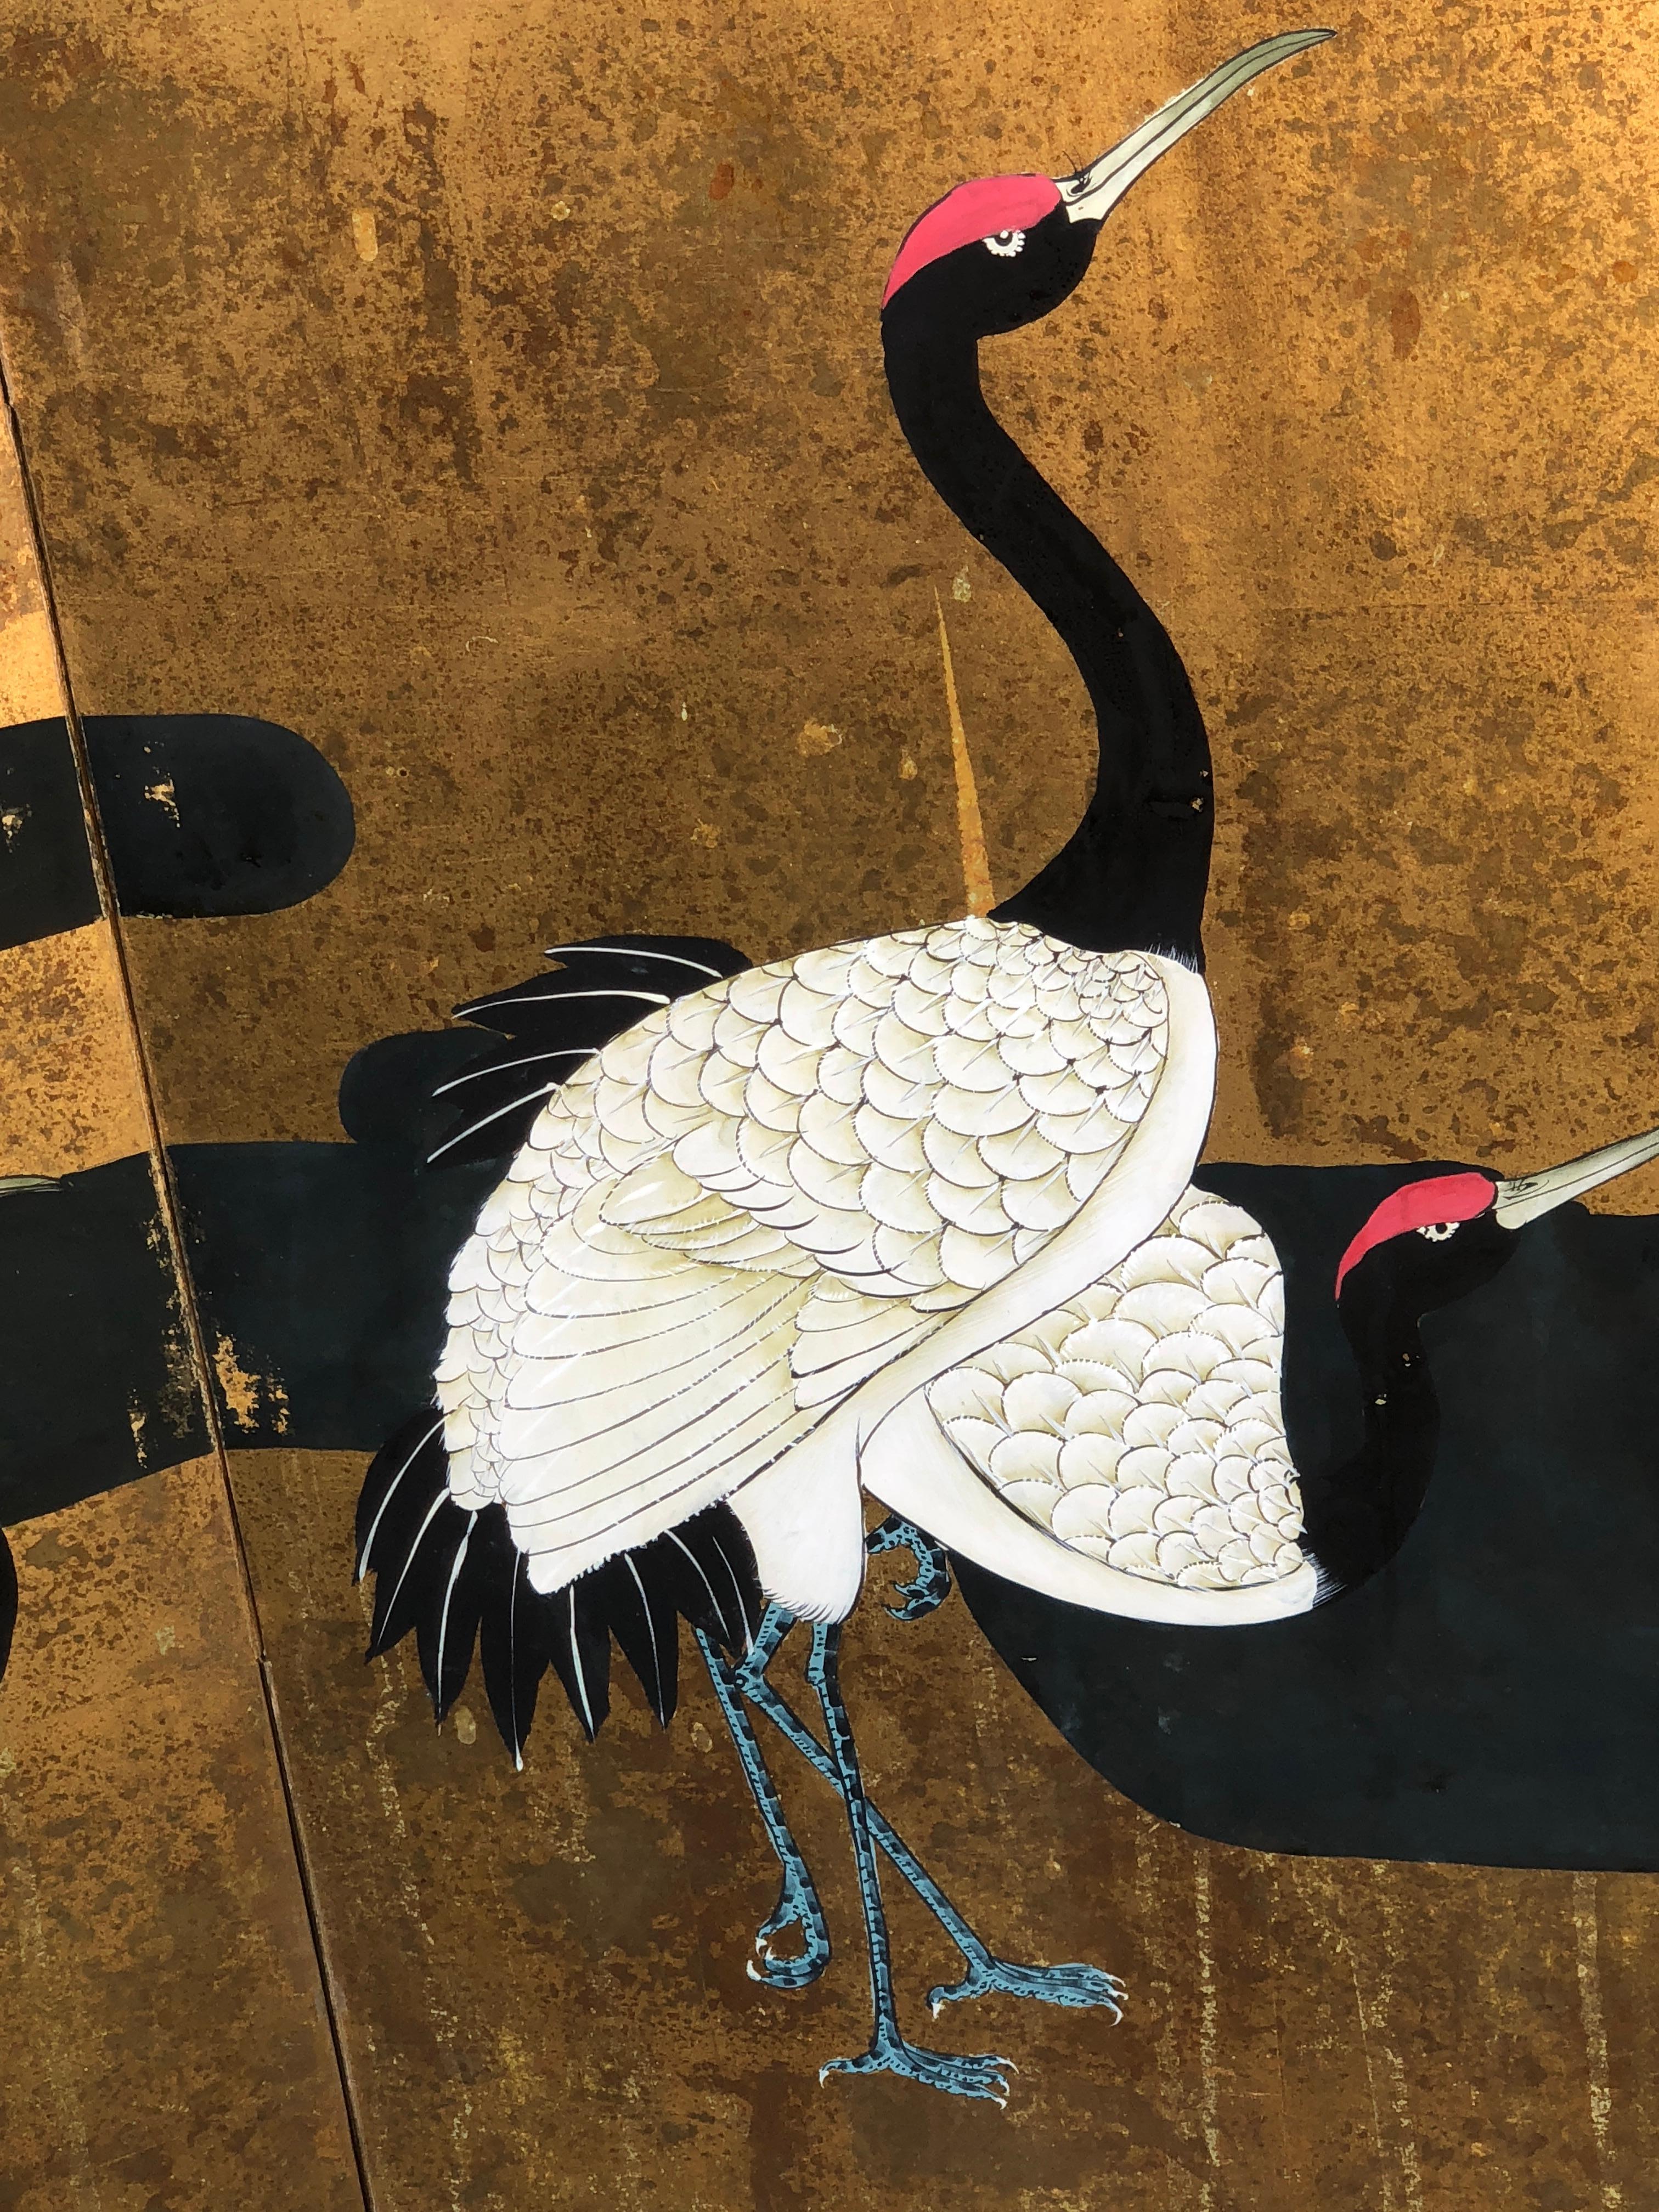 Phenomenal four-panel screen painted with four exquisite renderings of cranes in various positions.

 Anonymous artist 
(Japan, meiji era, 19th century)
CRANES ALONG A RIVER
Grues aux bords d'une riviere - Kraniche an einem Flussufer
Gru sulla riva